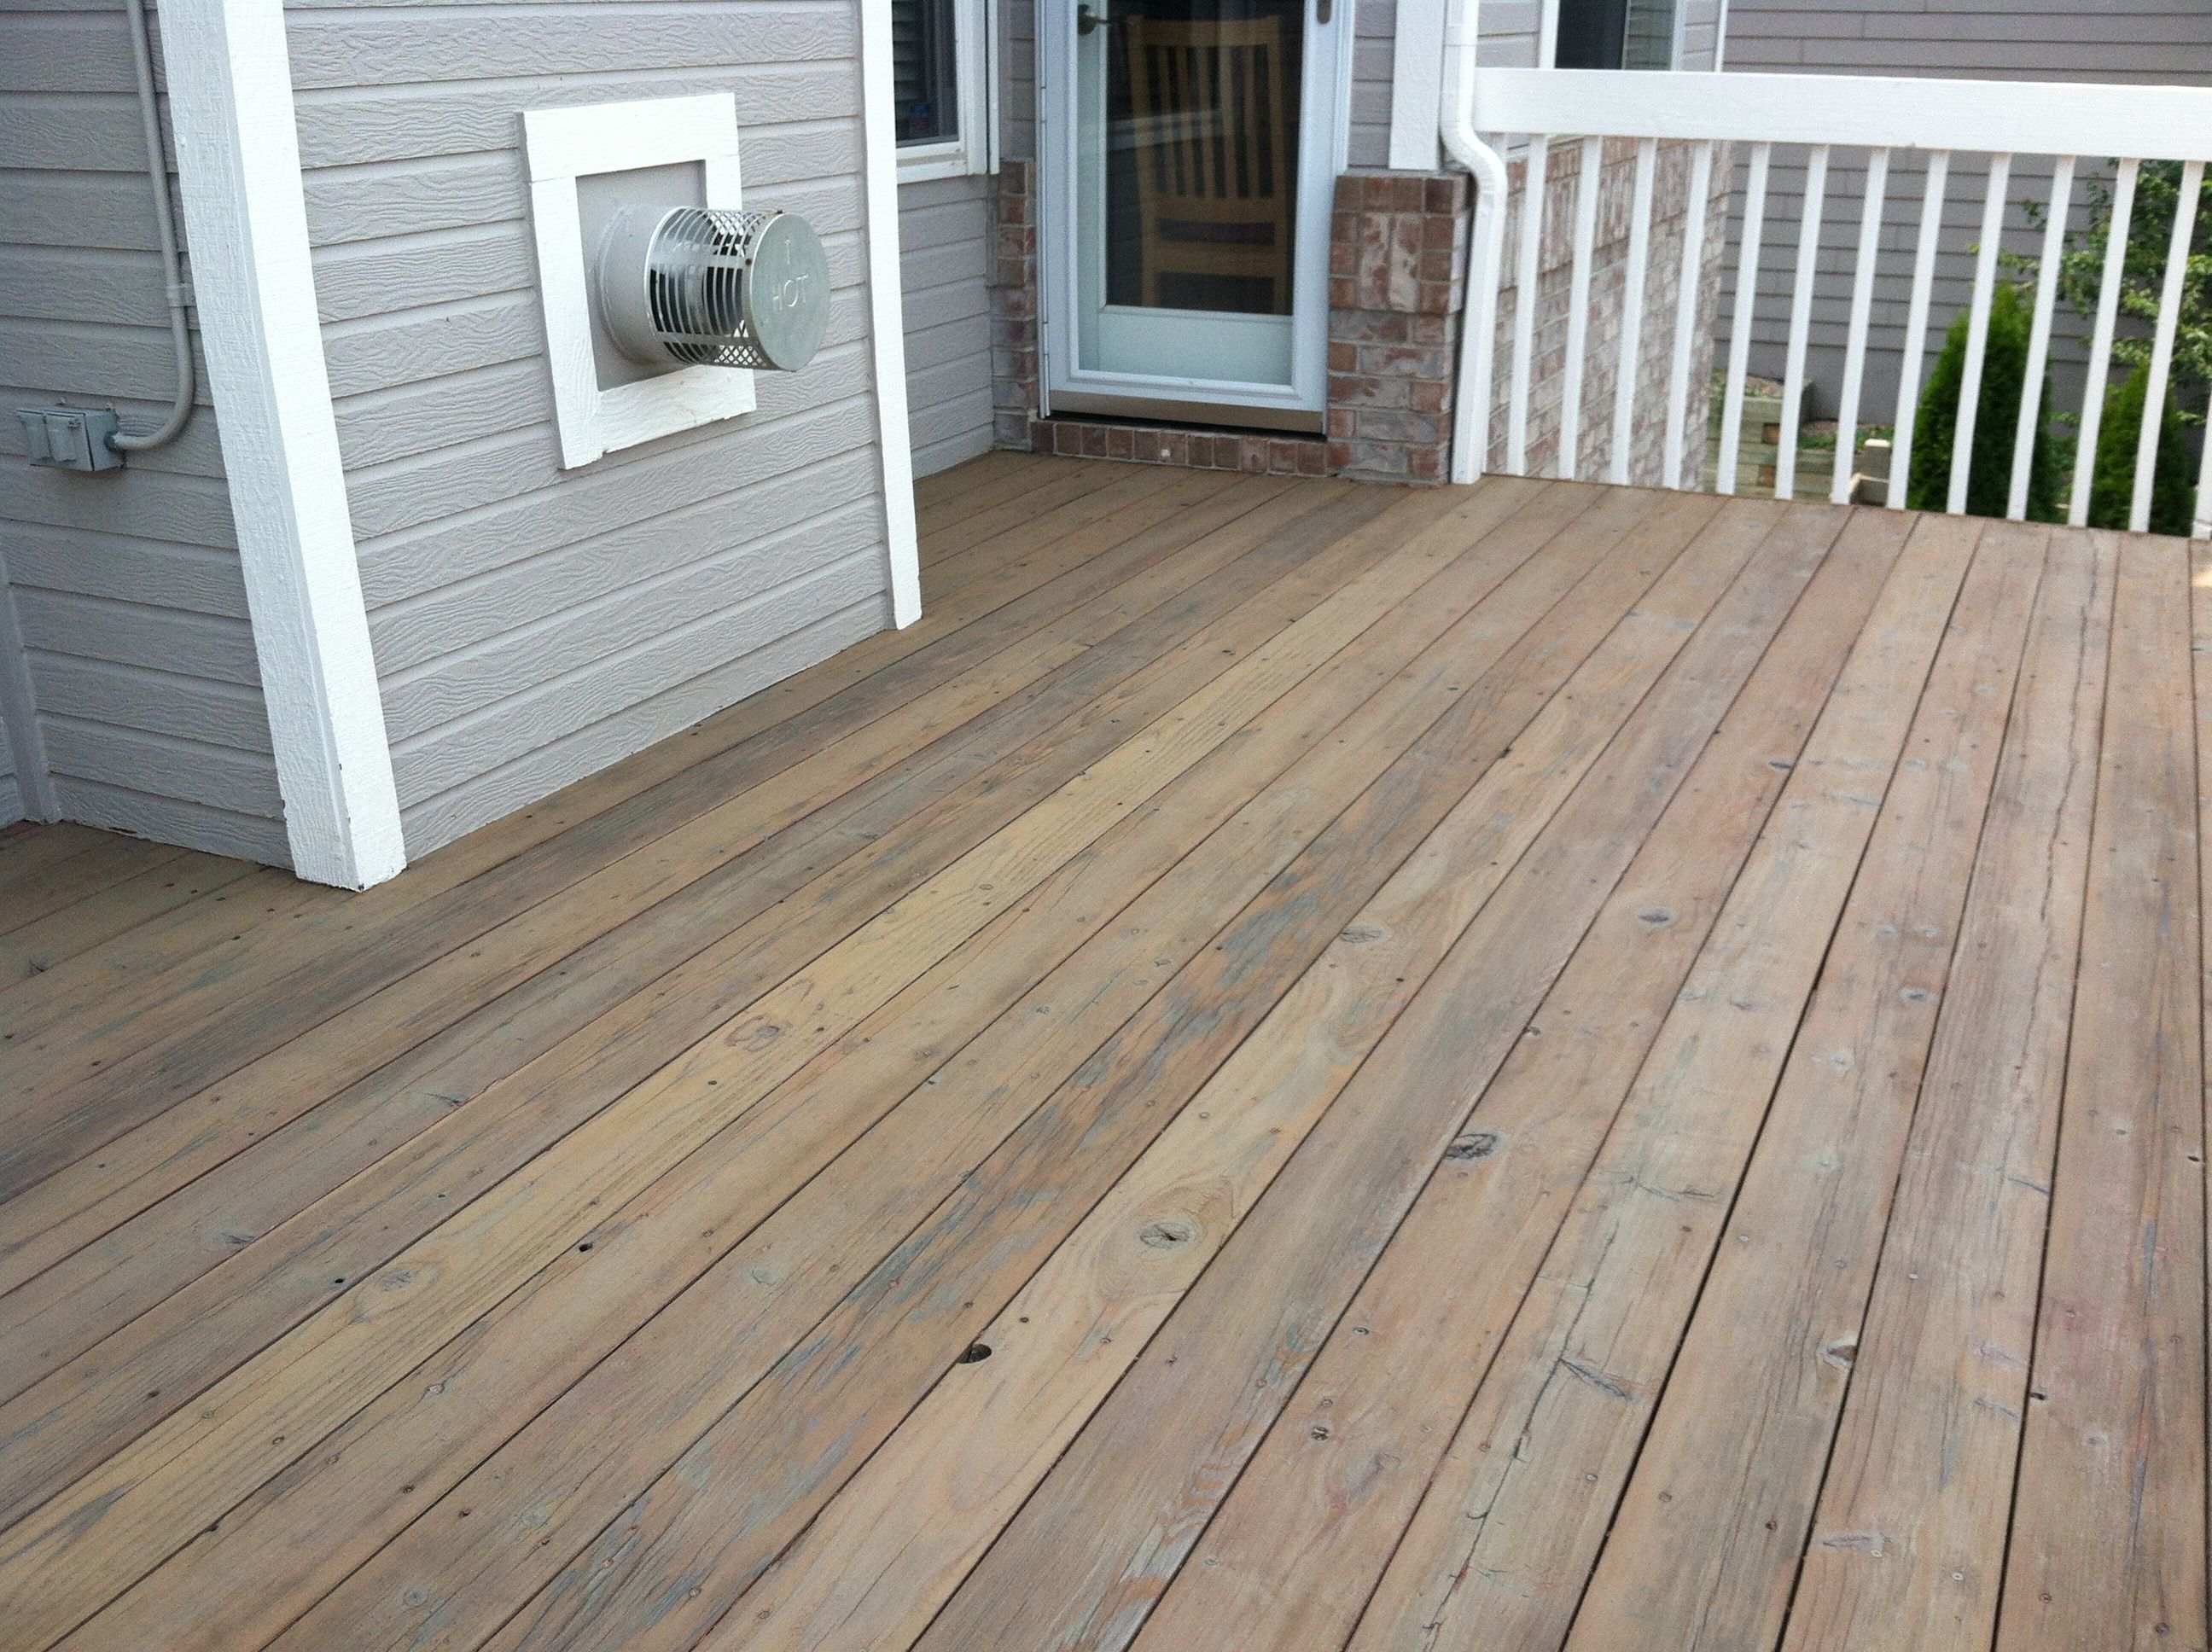 Cabot Deck Stain In Semi Transparent Taupe Best Deck Stains within sizing 2592 X 1936